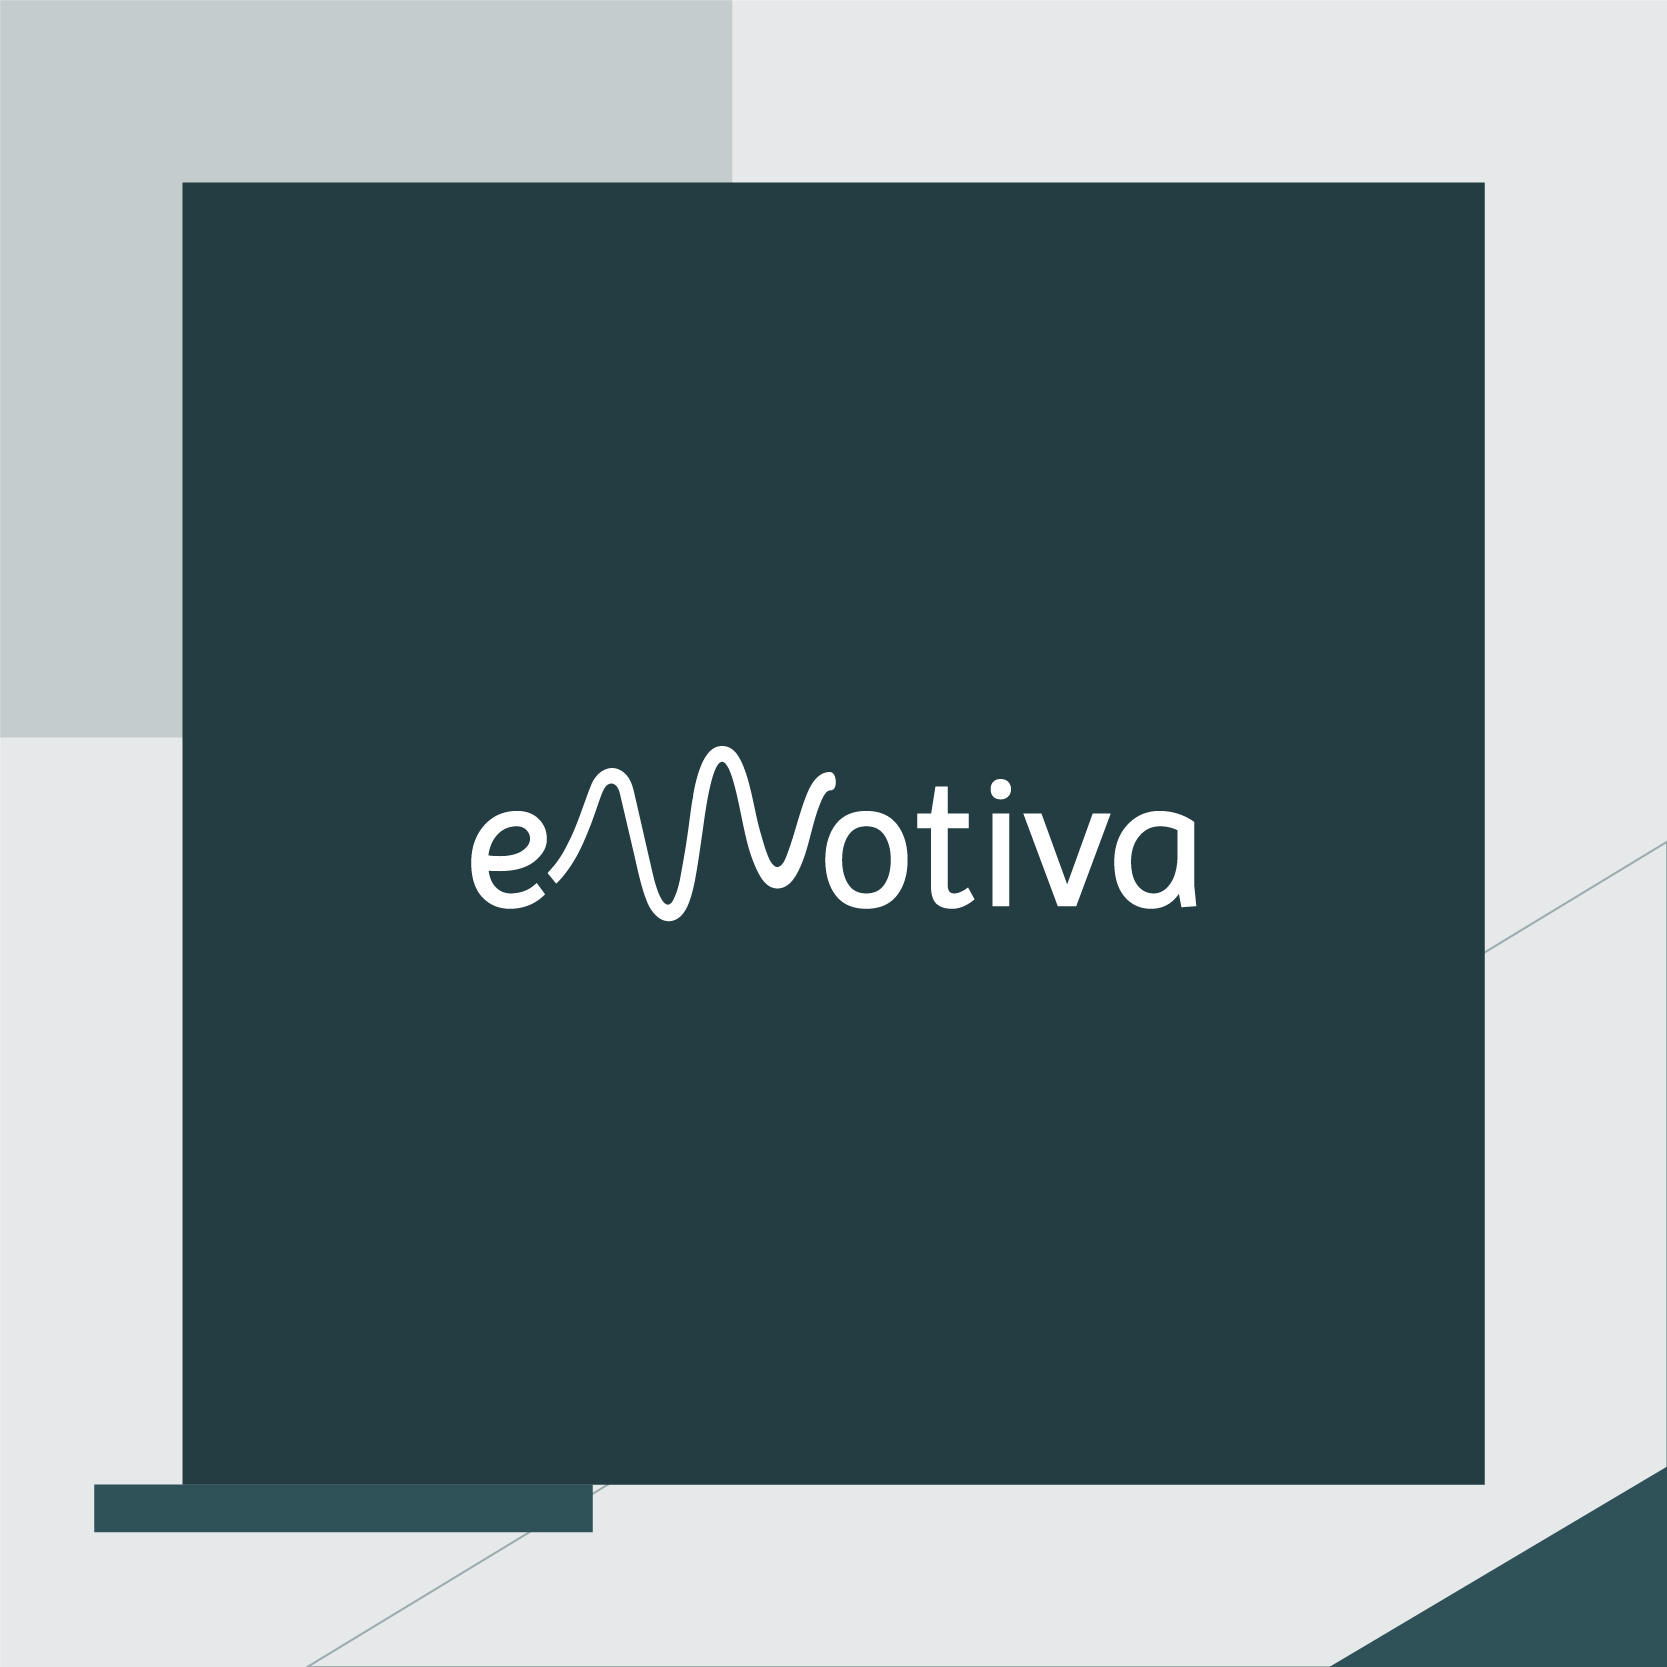 Emotiva, the emotion recognition startup, closes a €610K seed investment round